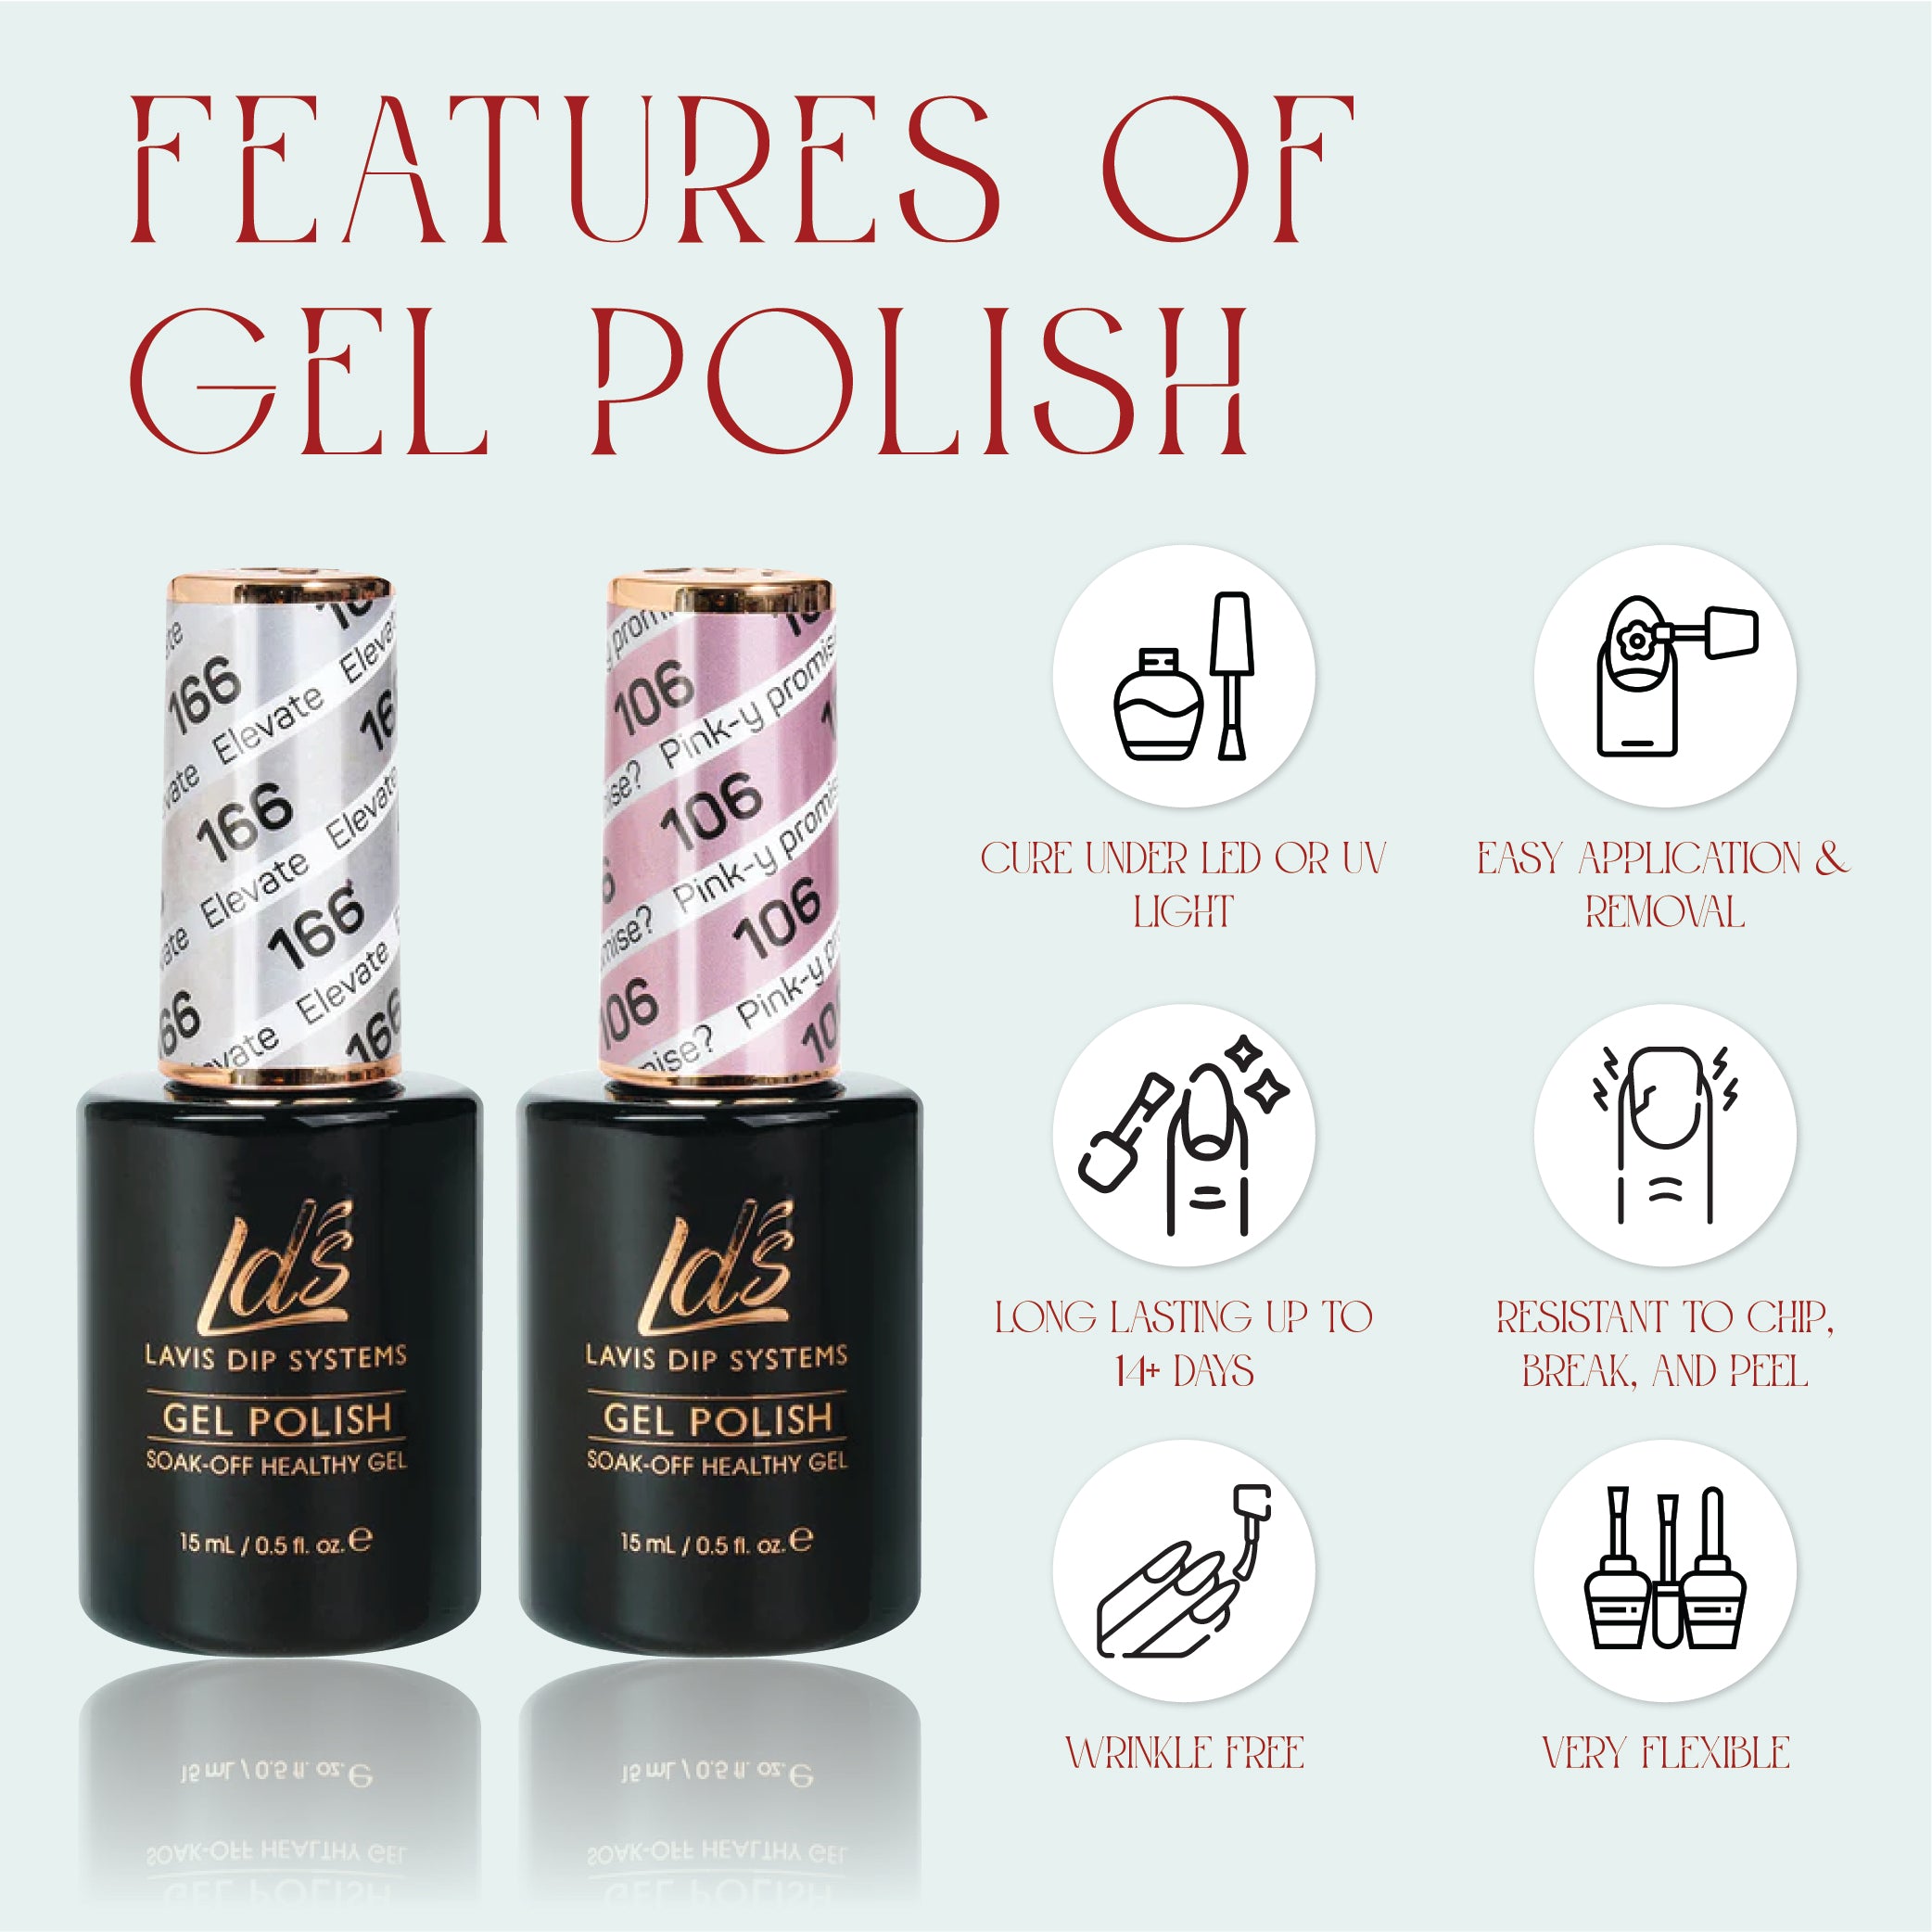 LDS Gel Nail Polish Duo - 043 Brown, Glitter Colors - Bronze